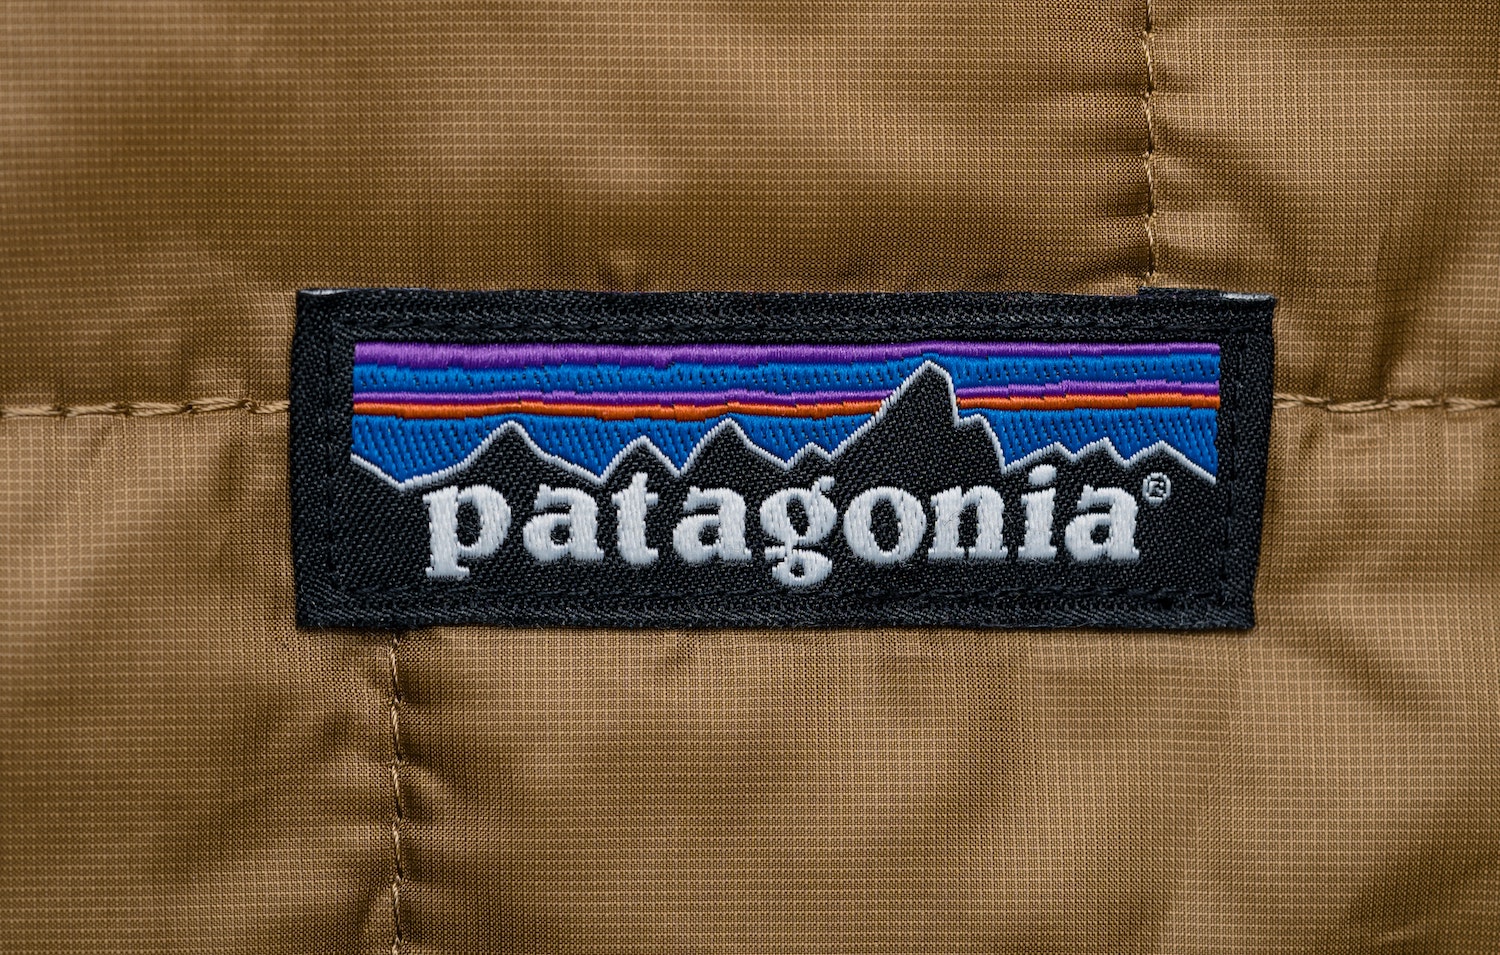 A jacket with a prominent Patagonia label